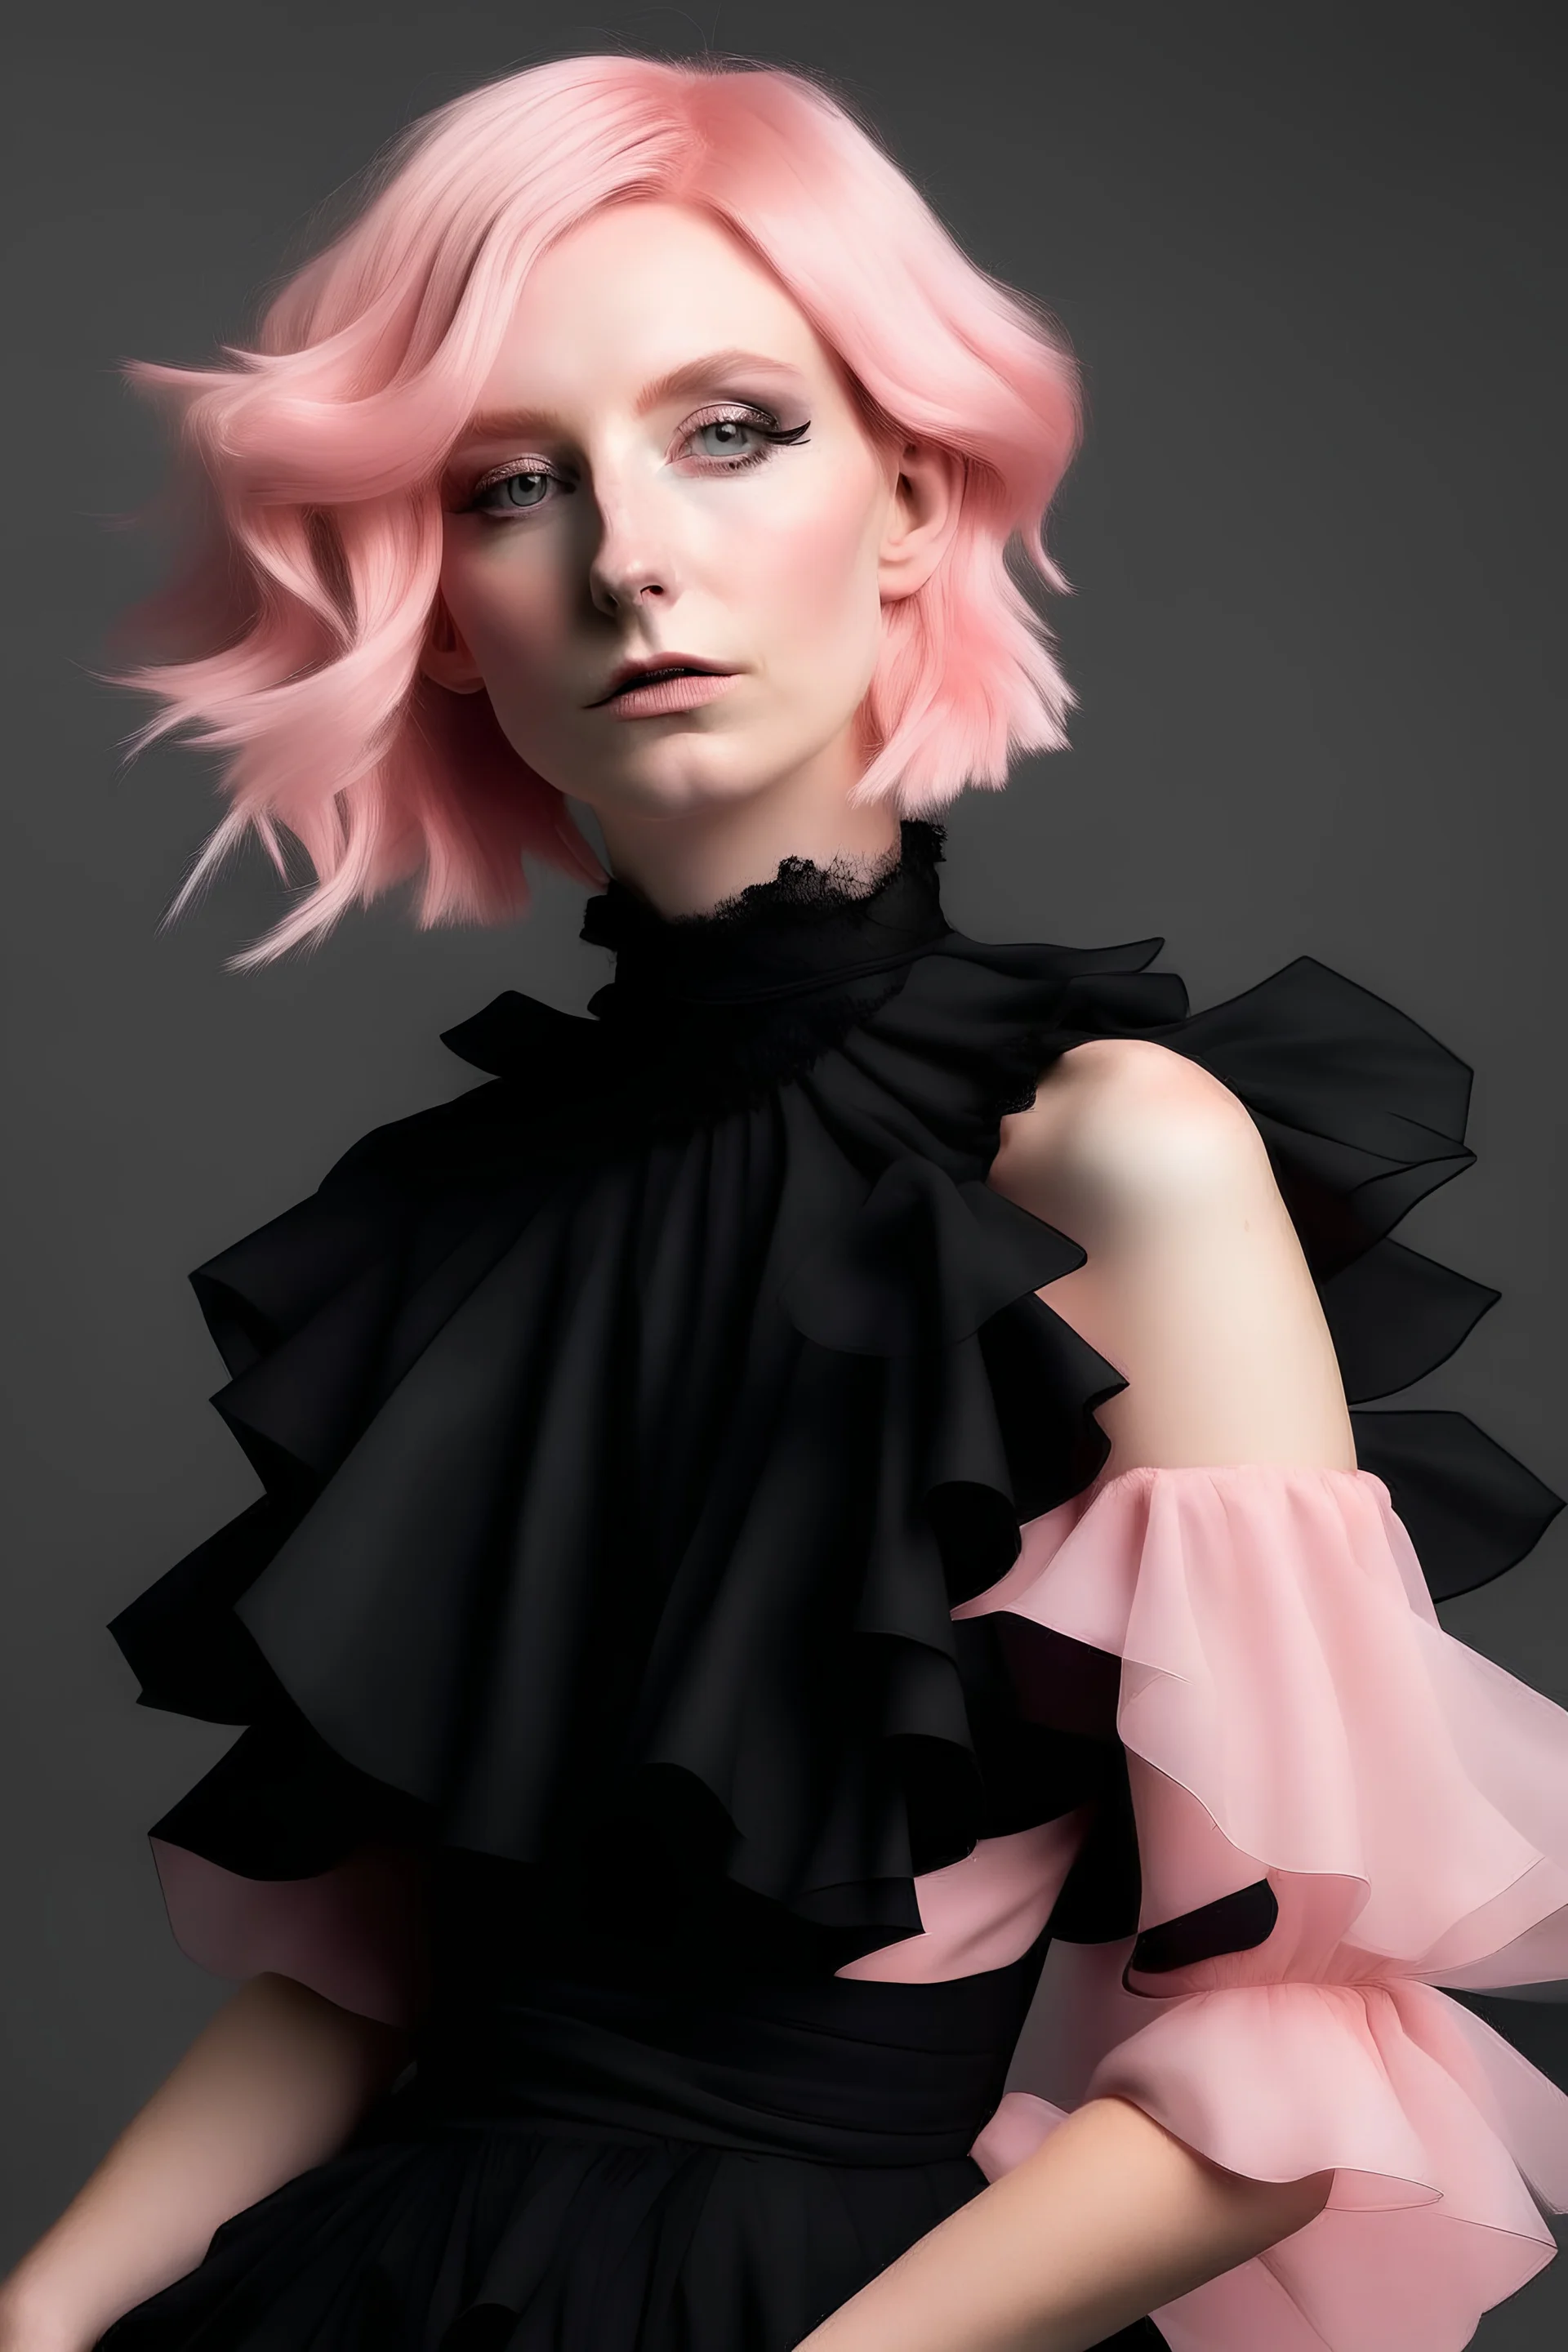 Pale pink Hair fashion model wearing a ruffles pink and black voile dress